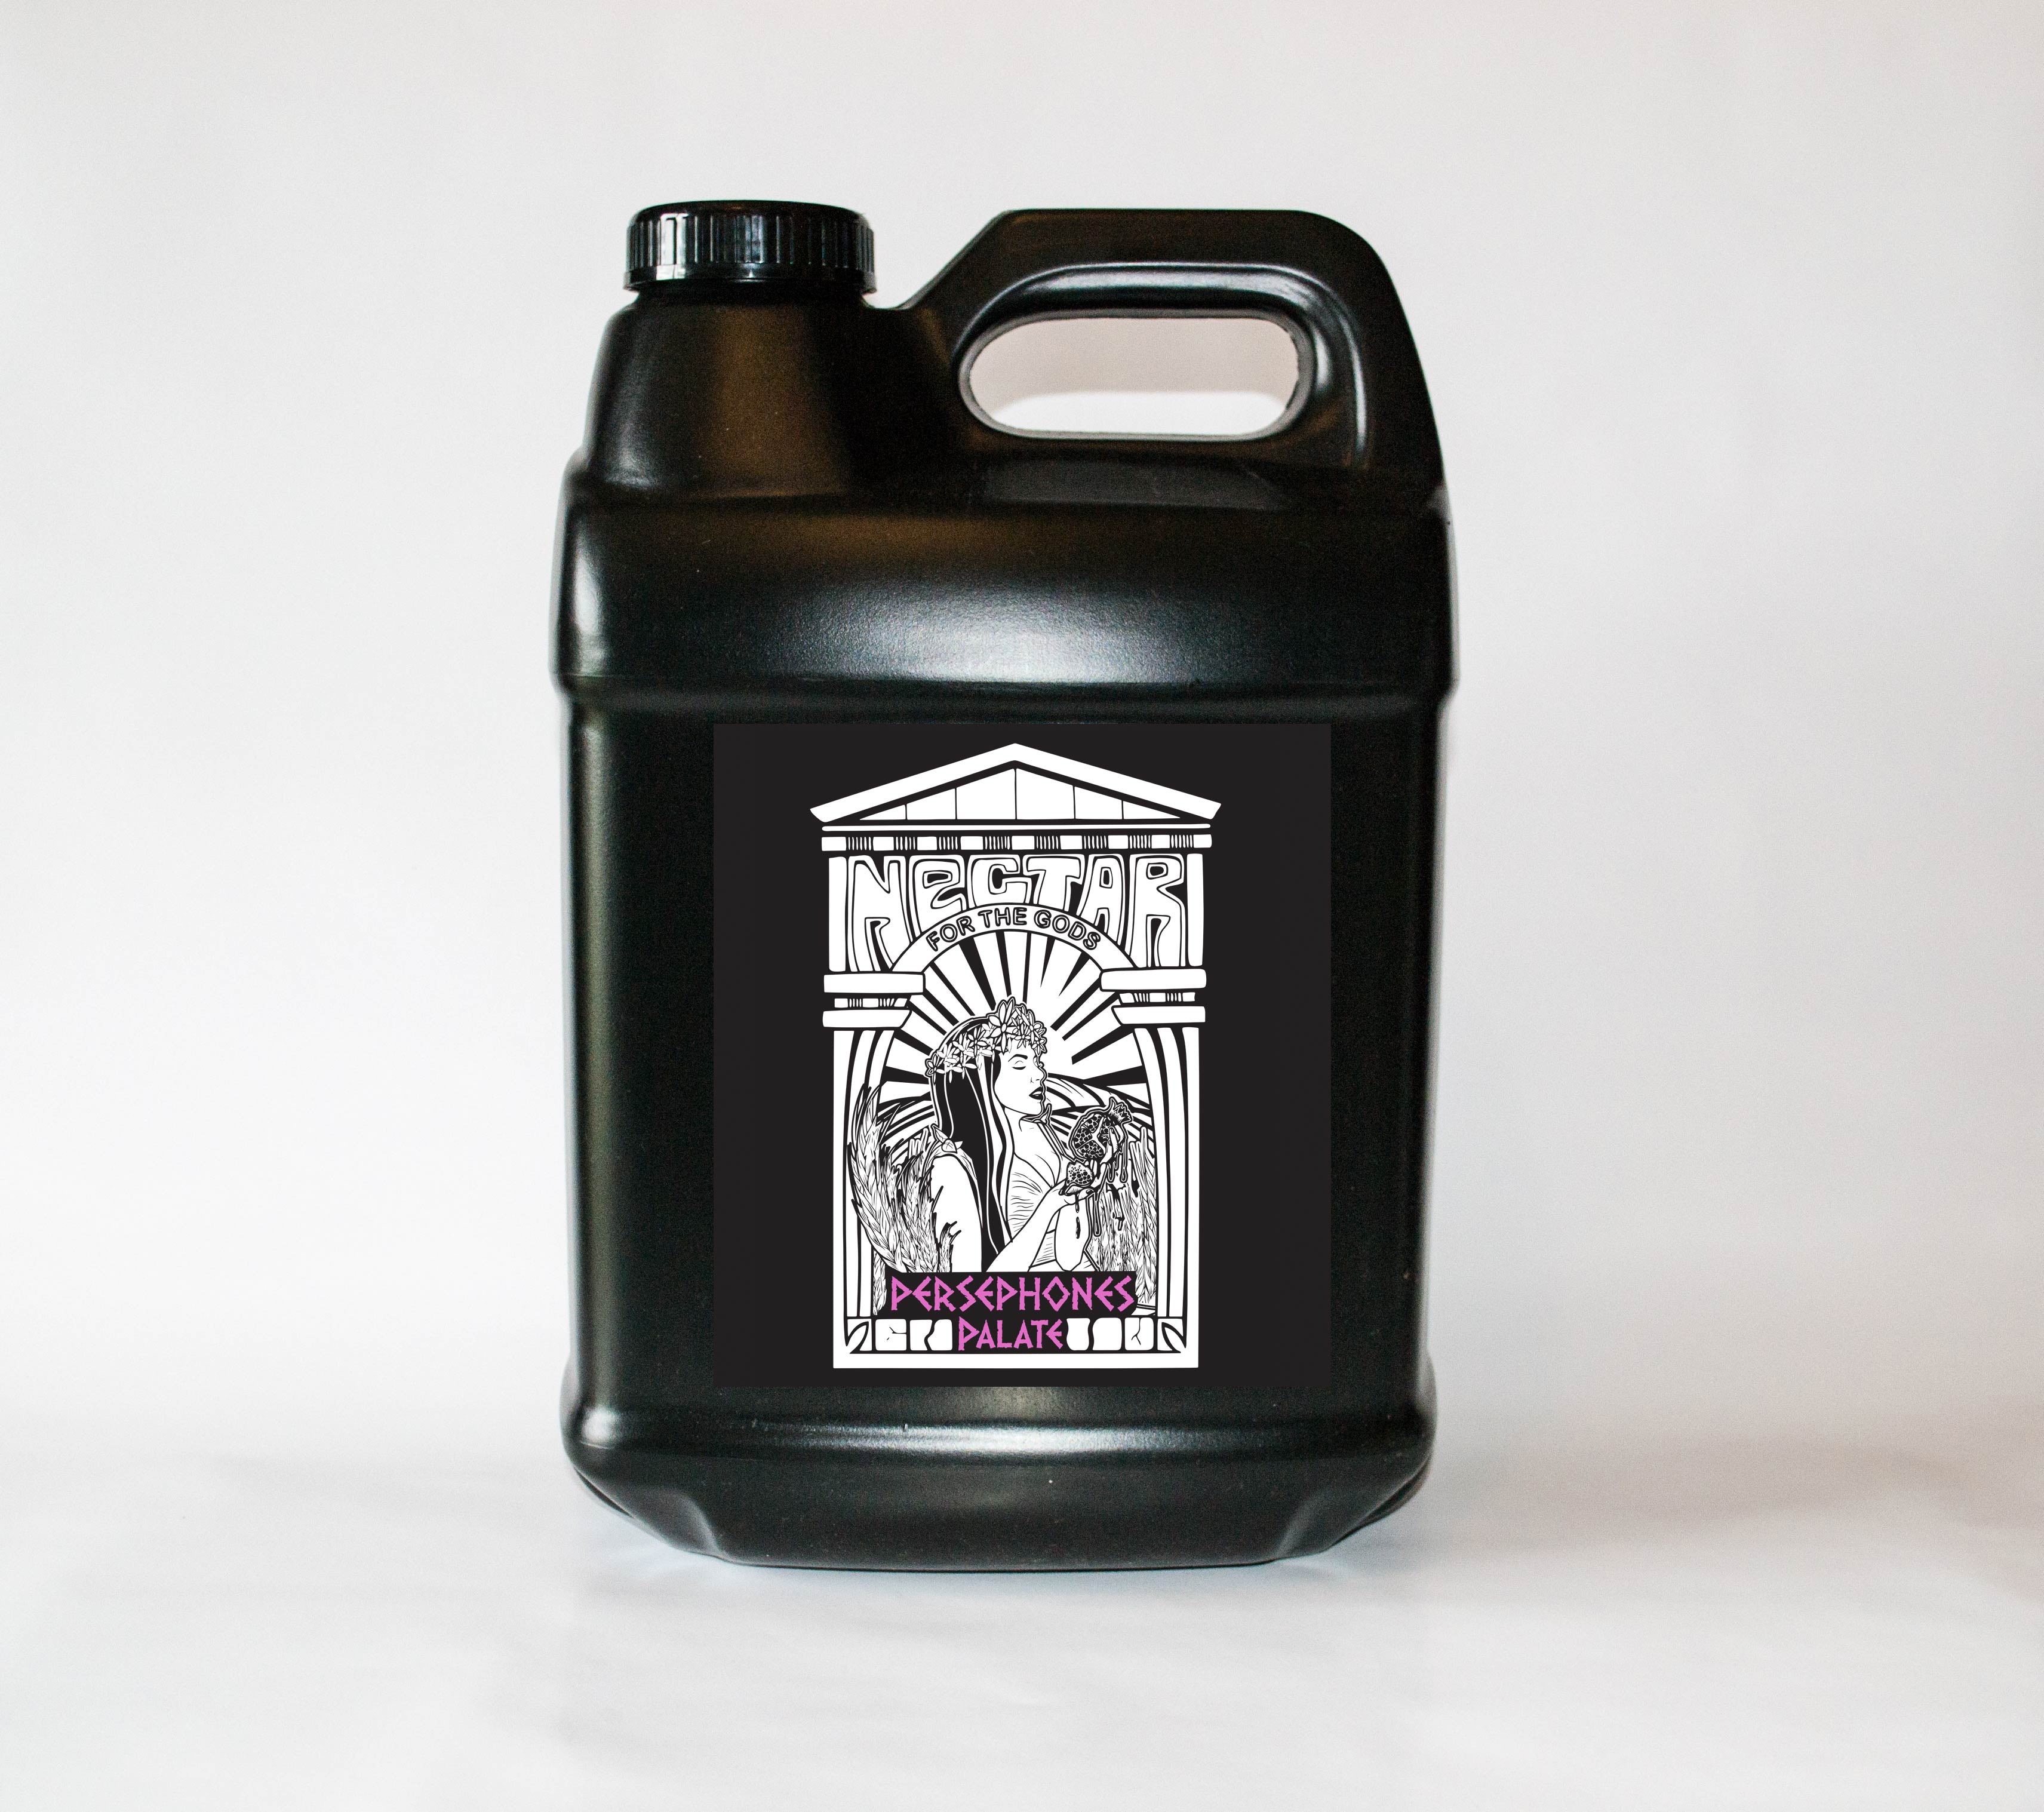 Nectar for the Gods Persephones Palate, 2.5 gal